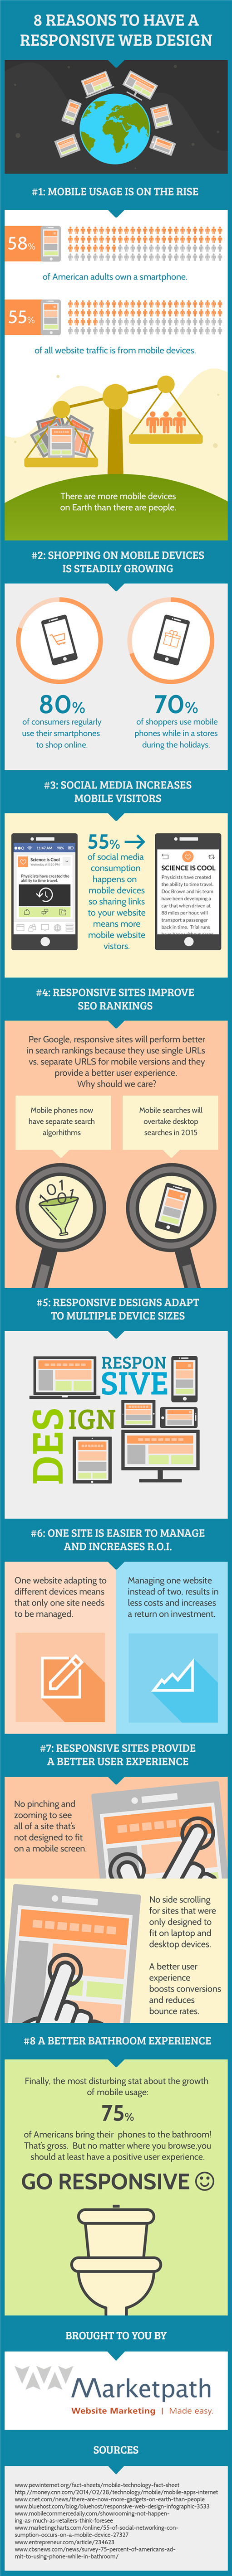 8 Reasons to Have a Responsive Web Design (infographic by Marketpath, Inc.)